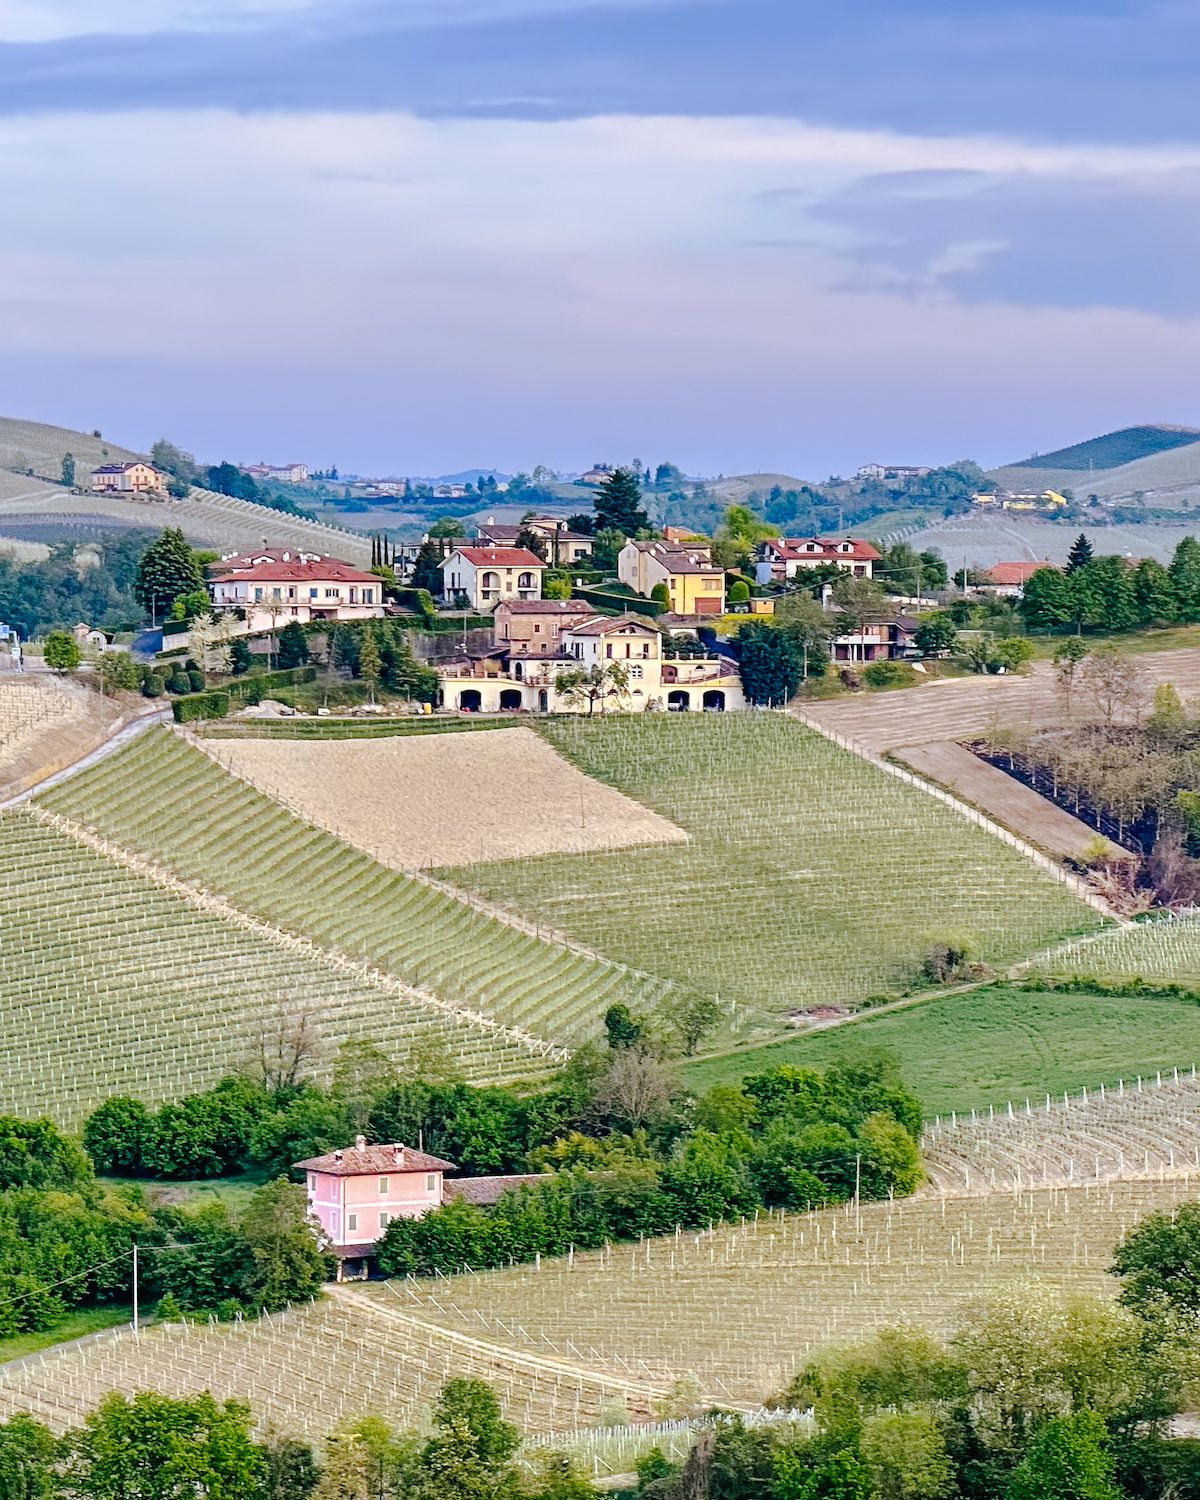 Green vines and houses with terracotta roofs in Barolo